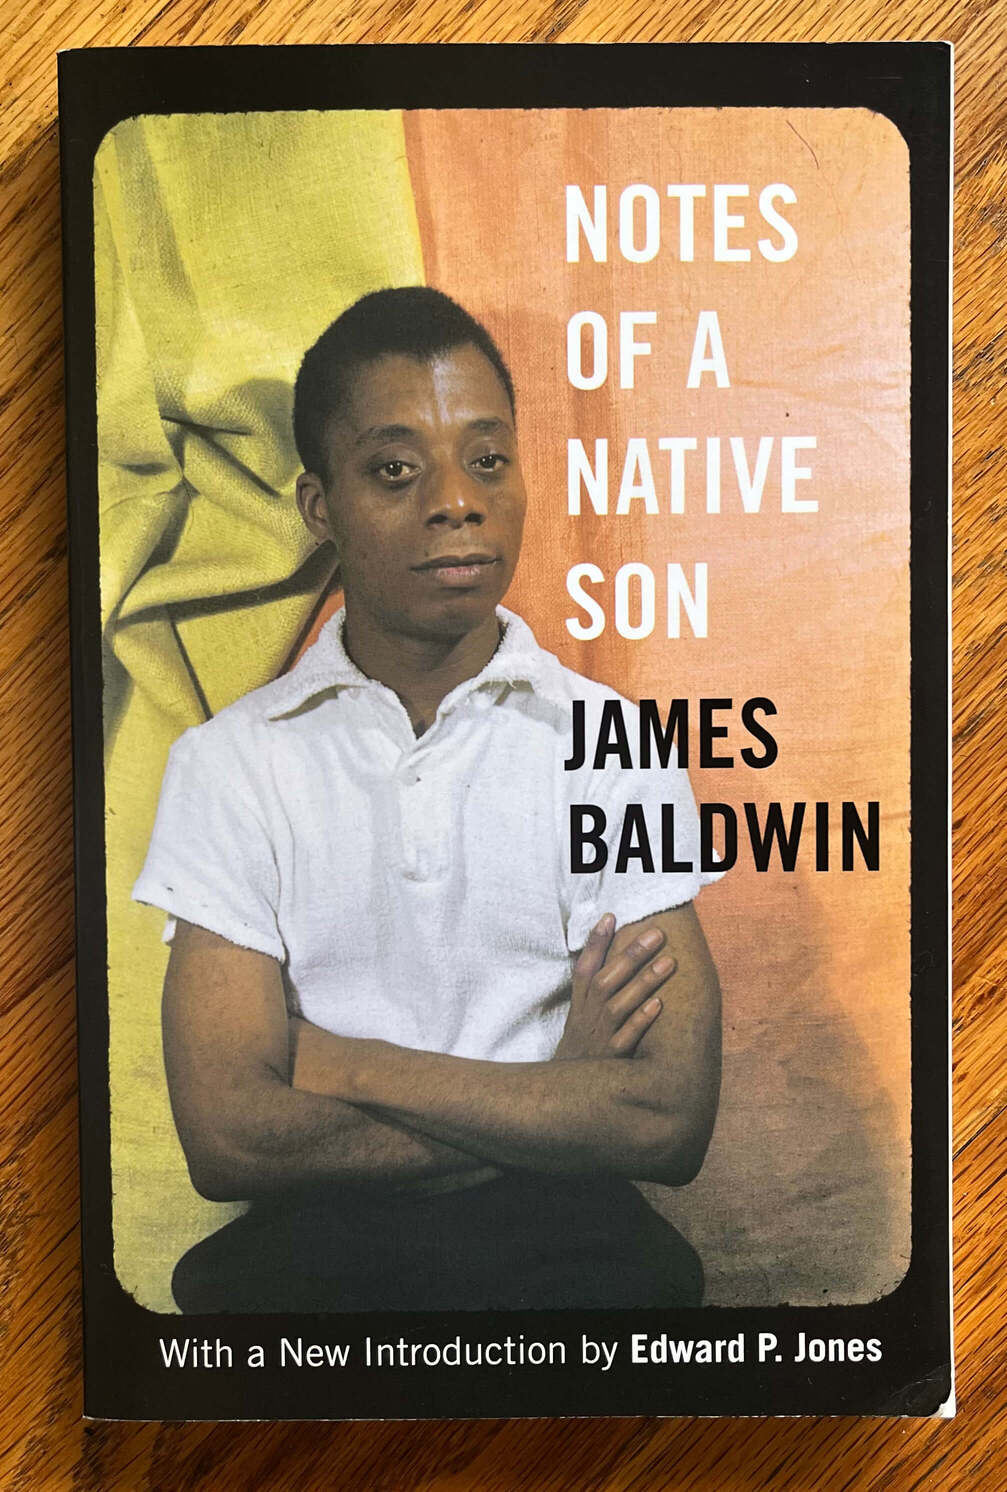 “Notes of a Native Son” by James Baldwin. With a New Introduction by Edward P. Jones